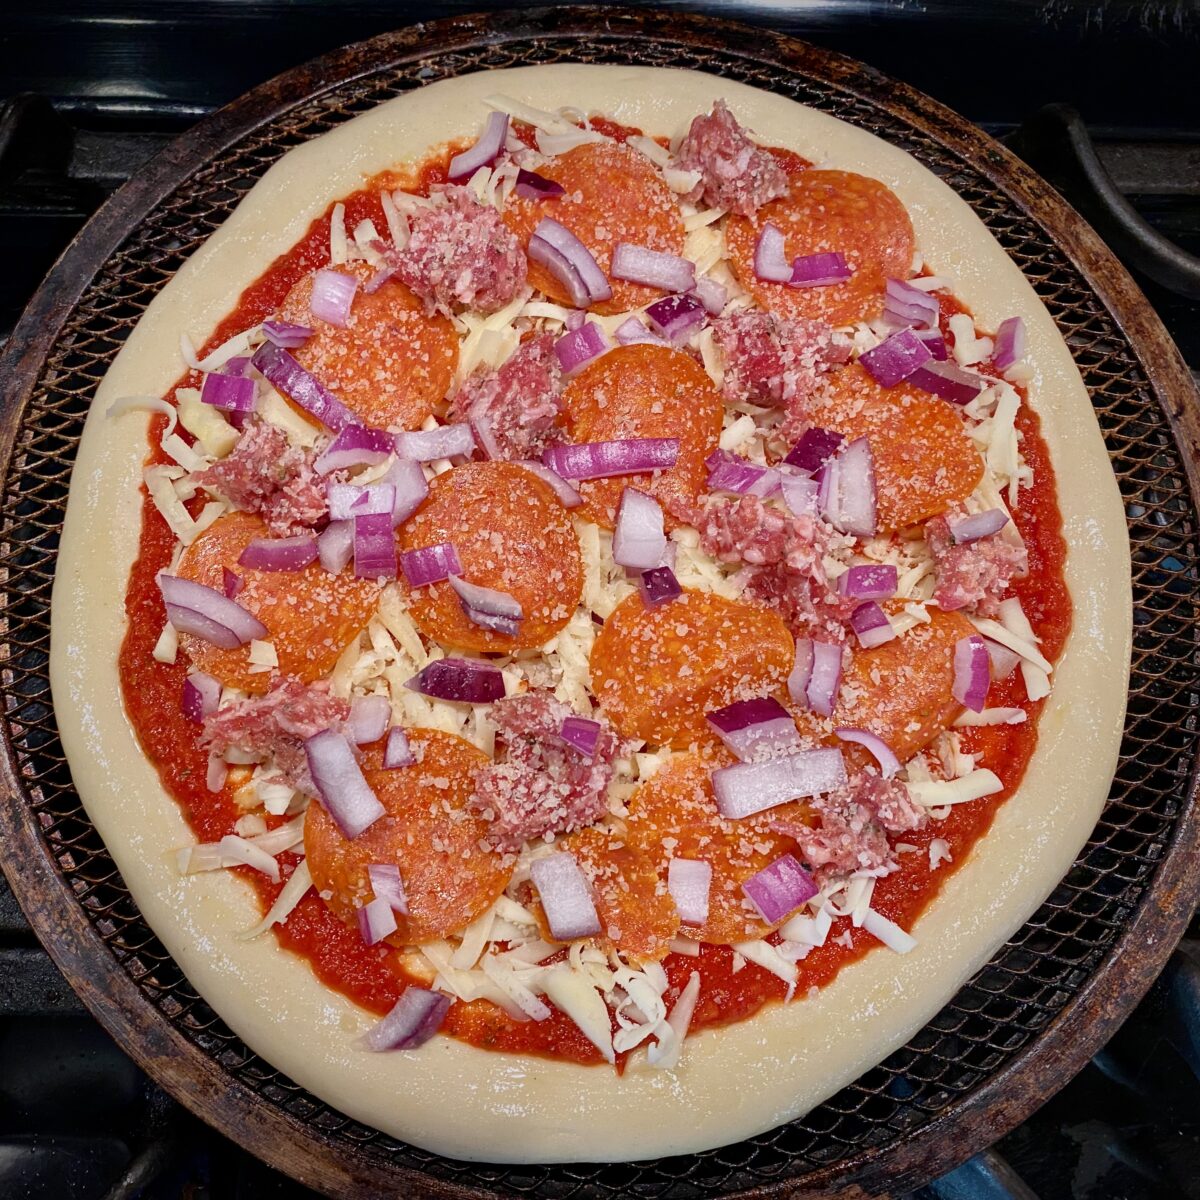 top view of a pizza crust that is topped with pizza sauce, cheese, pepperoni, sausage and. red onion.